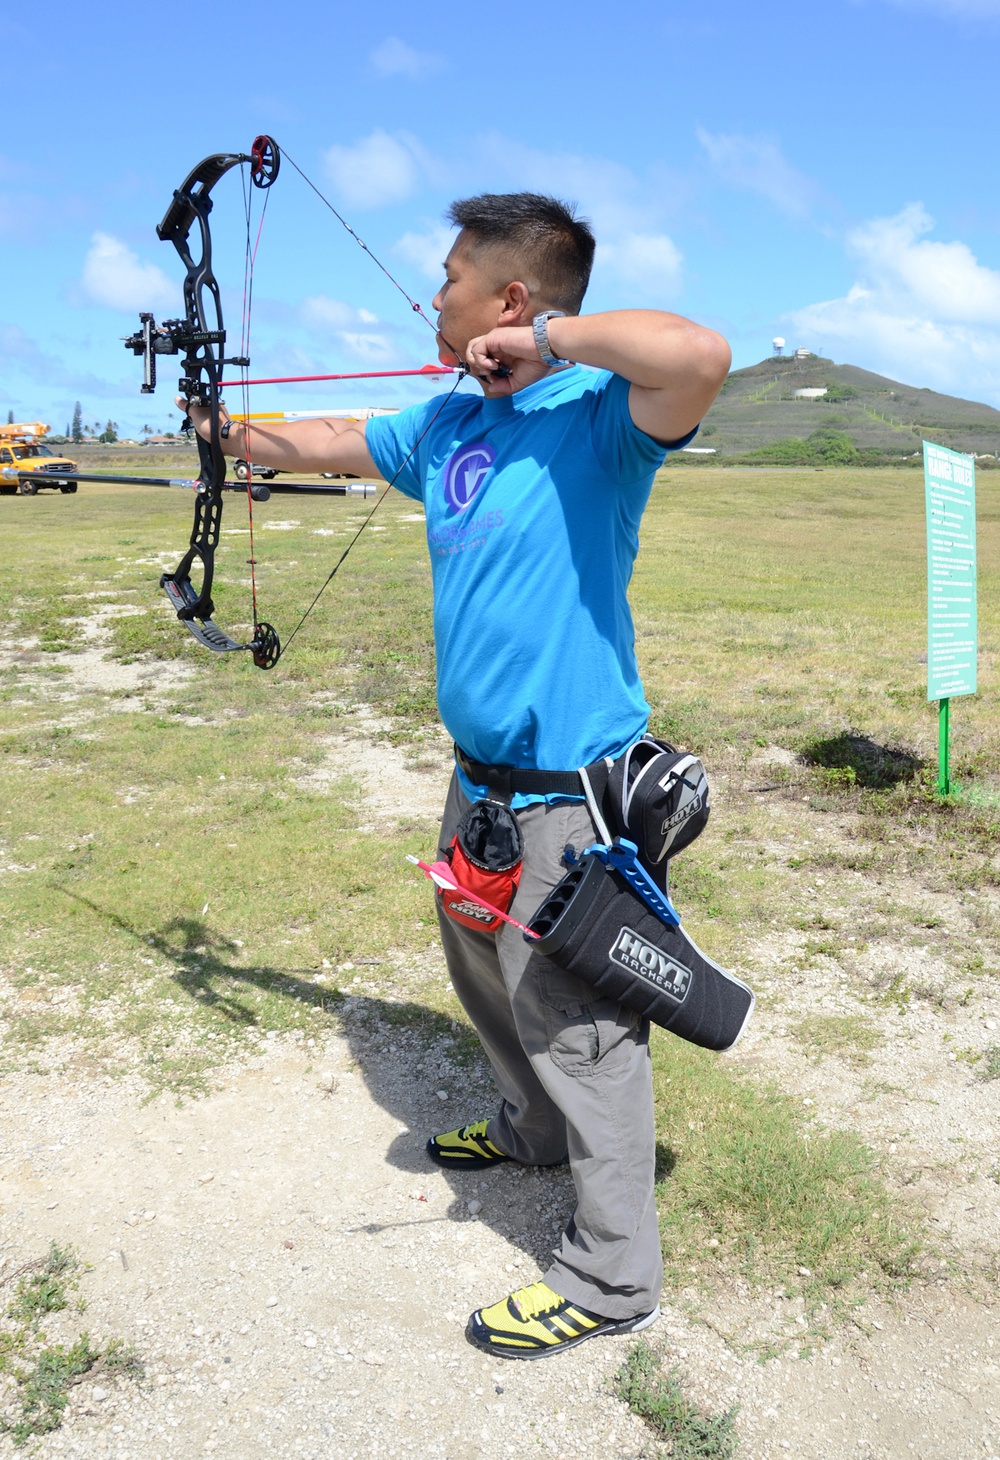 Wounded warriors earn shooting certification